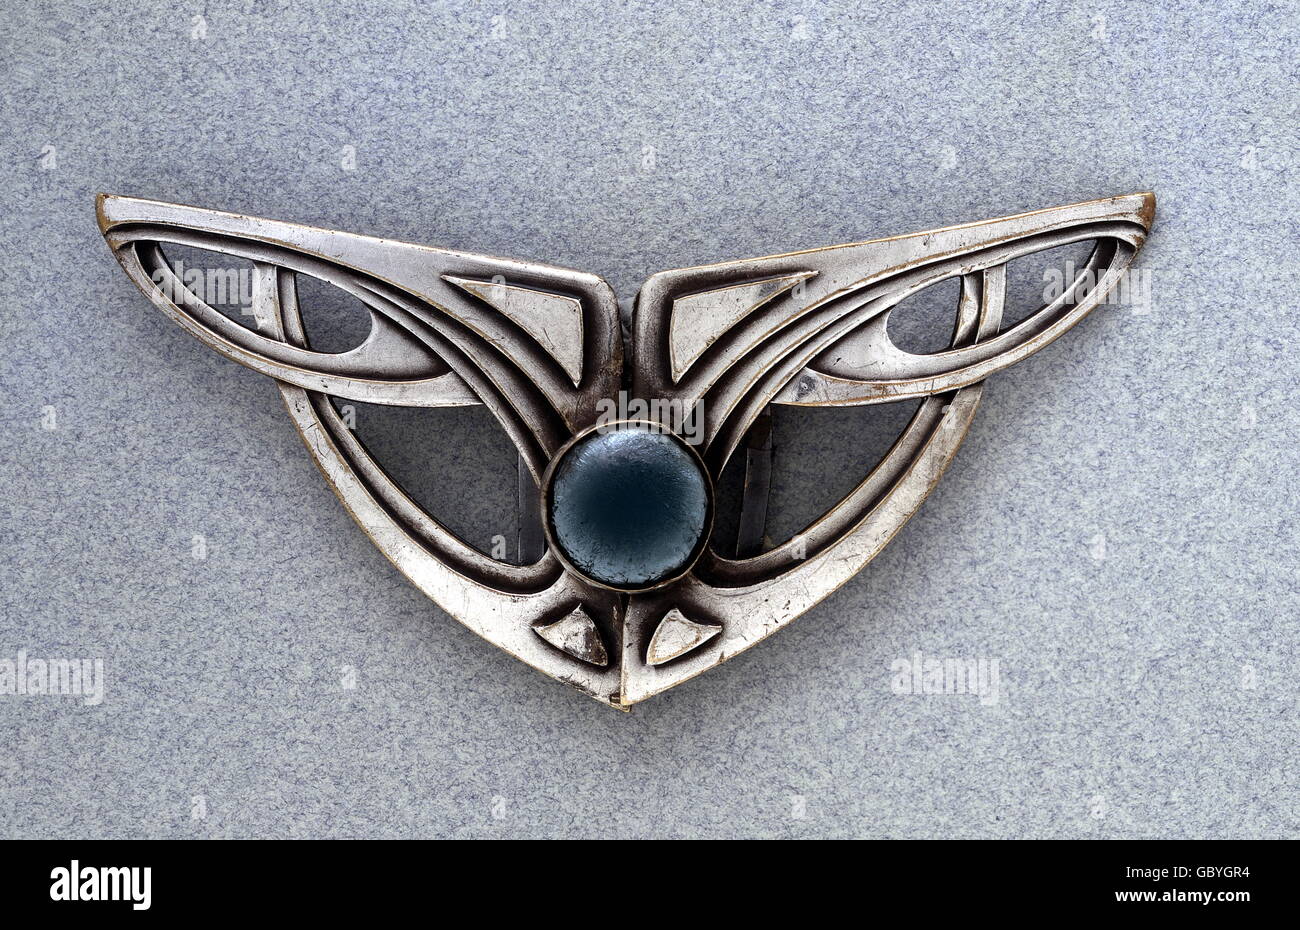 jewellery, belt buckle, white alloy, glass stone, cat's eye, two-piece, 50 x 100 mm, circa 1900, Additional-Rights-Clearences-Not Available Stock Photo